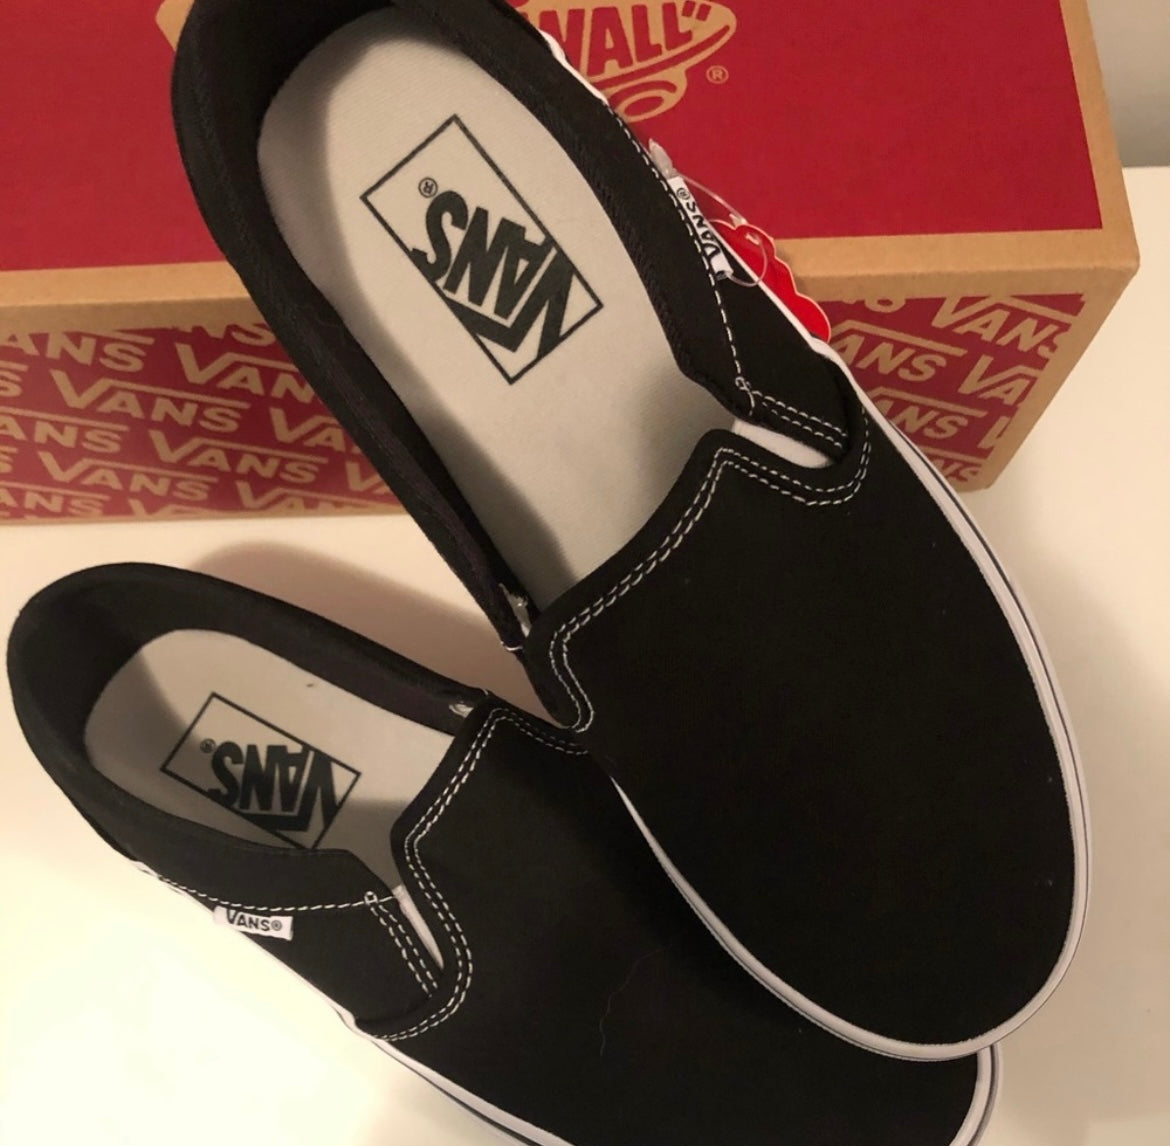 Vans Asher Canvas Black and White Slip on Sneakers